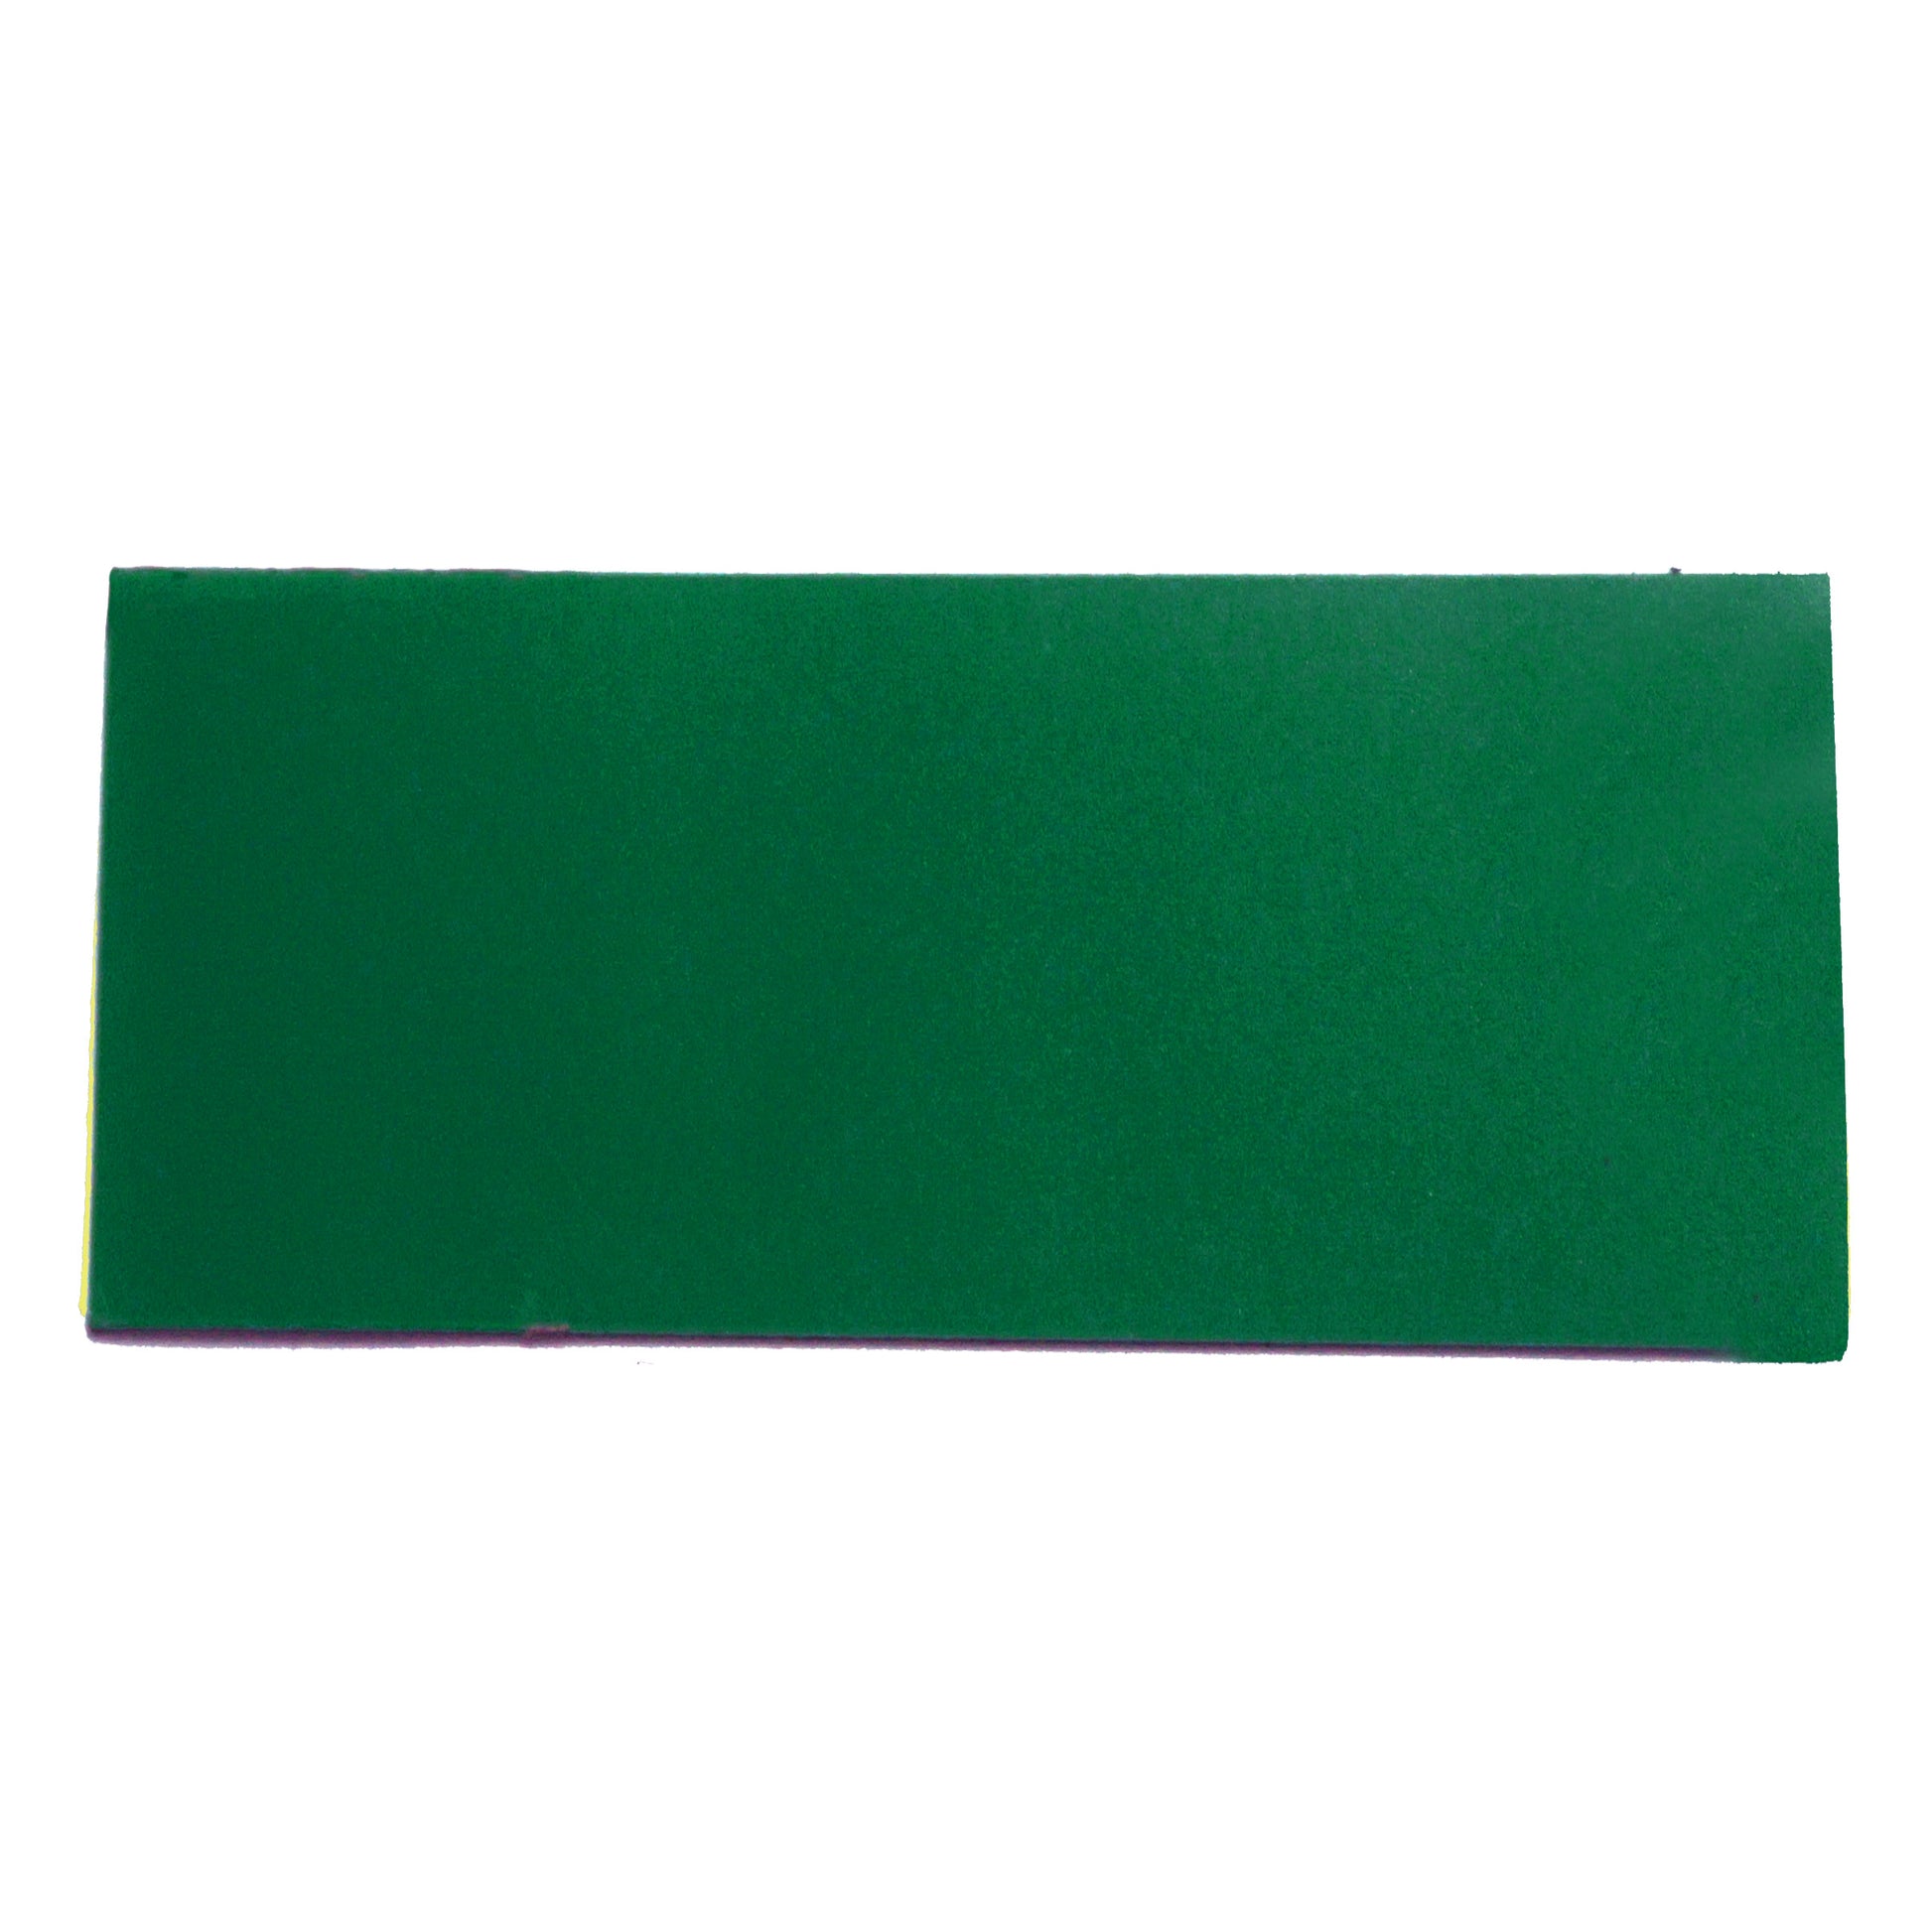 Load image into Gallery viewer, ZGN03090GR/WKS50 Magnetic Labeling Strip with Green Vinyl Surface - Bottom View